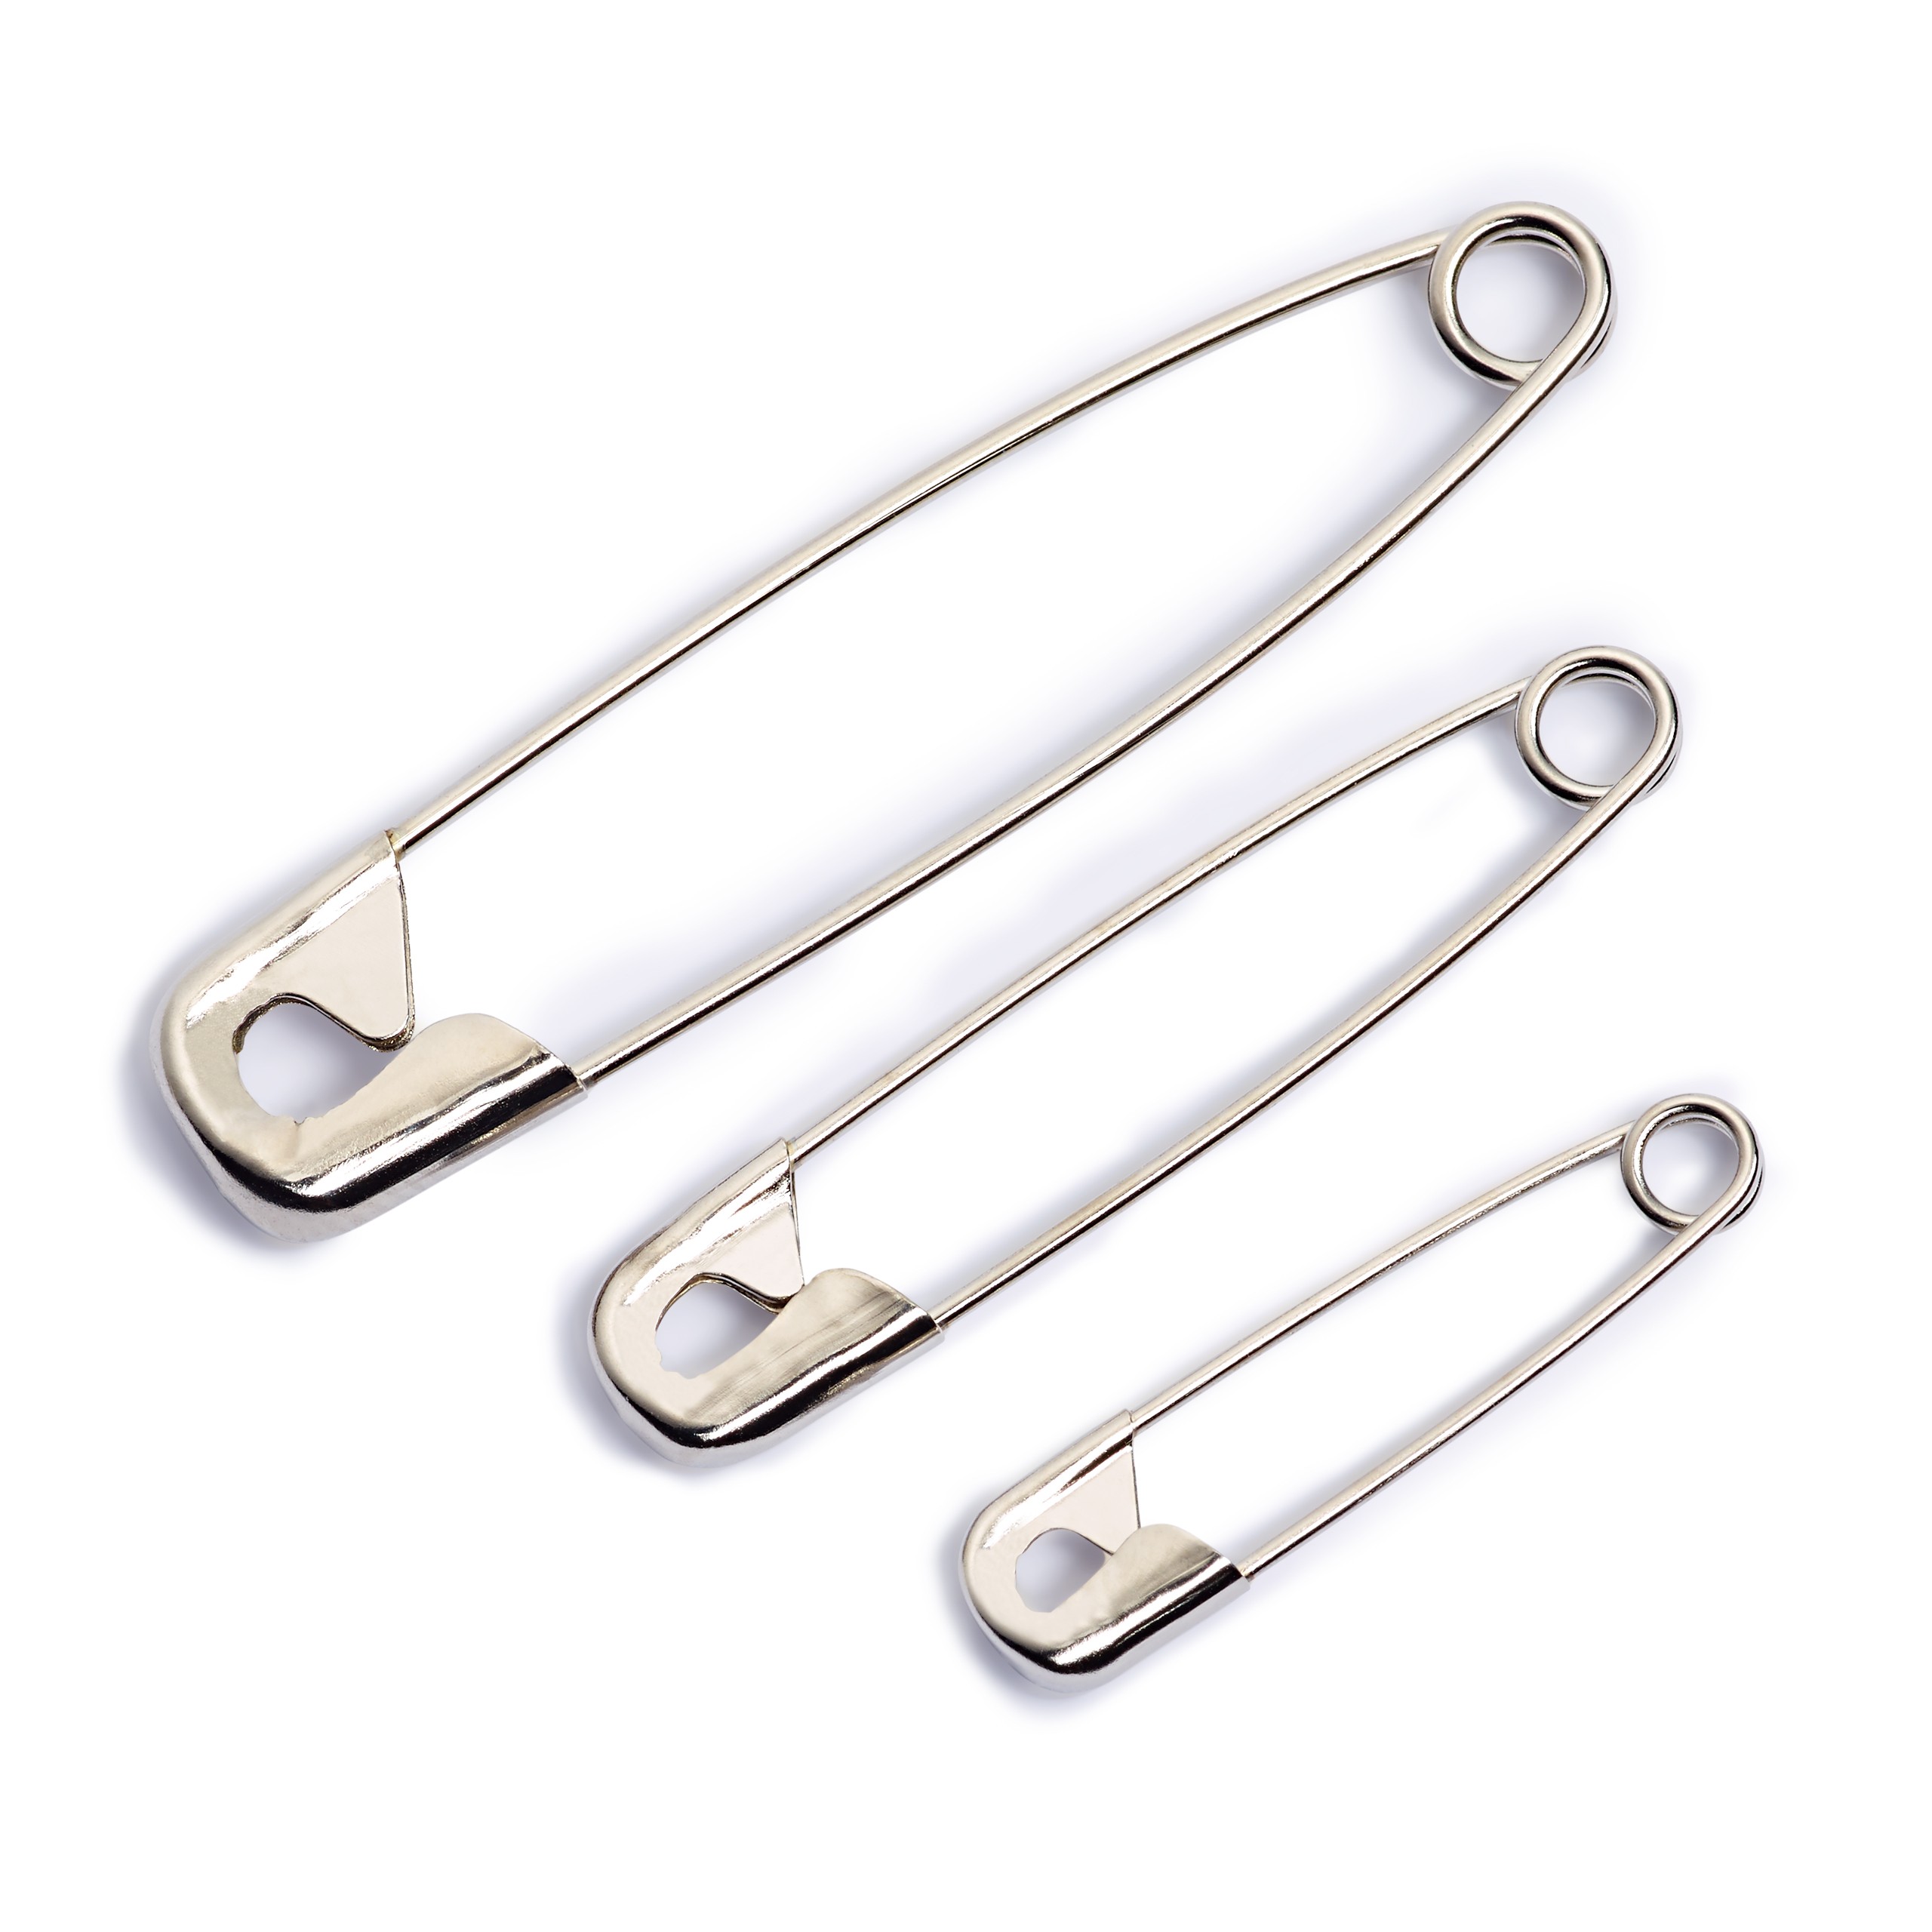 Prym Safety Pins with Coil - Size 2/38mm > Safety Pins > Barnyarns ...